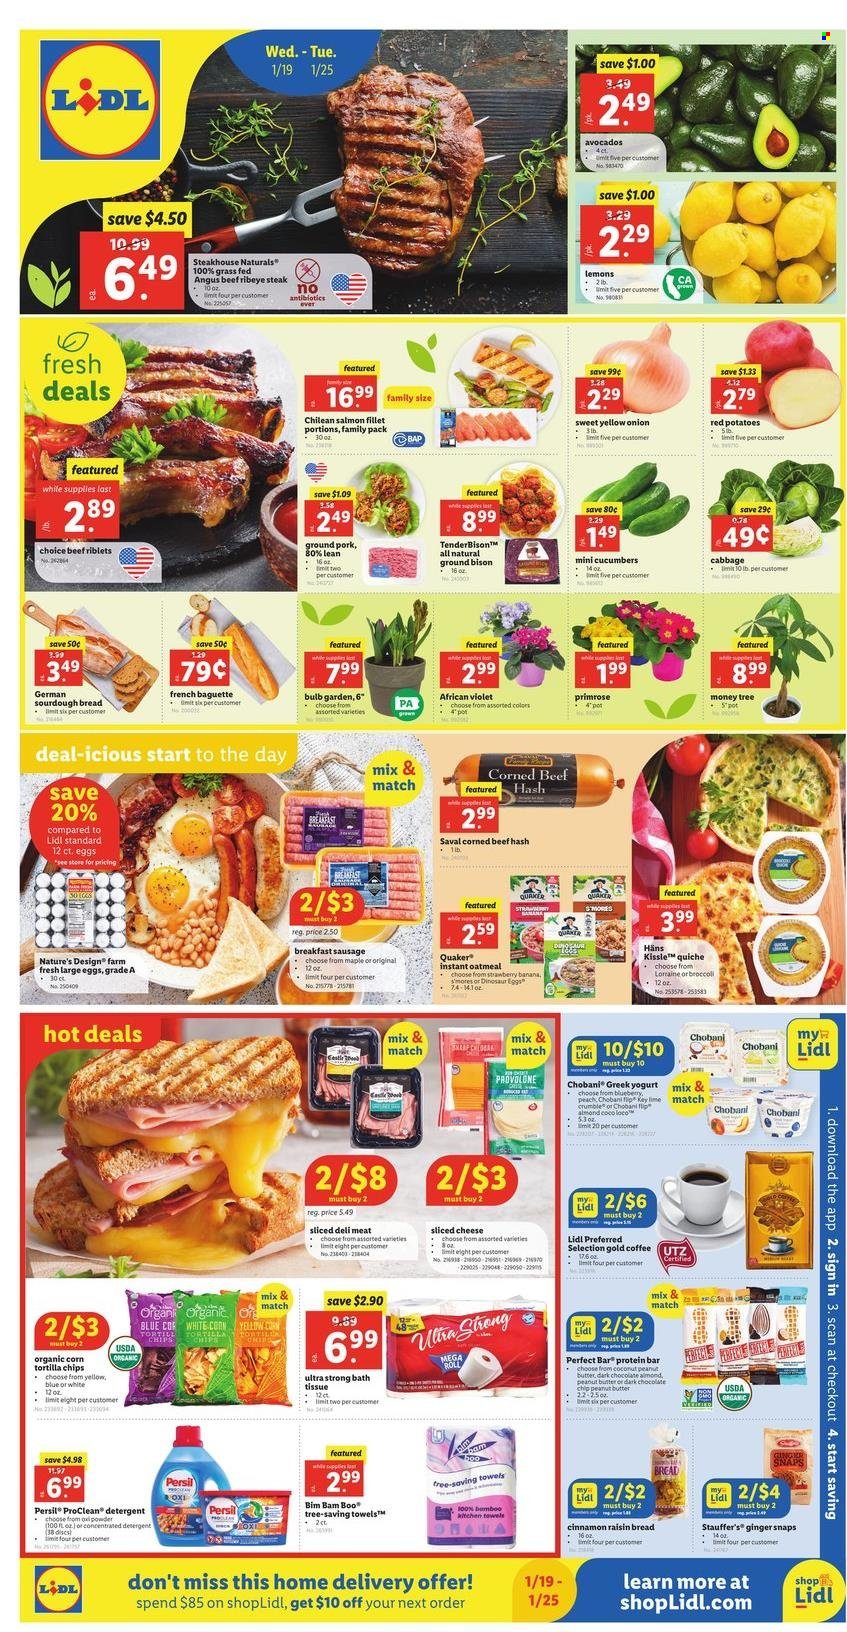 thumbnail - Lidl Flyer - 01/19/2022 - 01/25/2022 - Sales products - baguette, bread, sourdough bread, cabbage, cucumber, potatoes, onion, red potatoes, avocado, coconut, salmon, salmon fillet, beef hash, Quaker, sausage, corned beef, sliced cheese, cheese, greek yoghurt, yoghurt, Chobani, large eggs, quiche, tortilla chips, chips, oatmeal, protein bar, peanut butter, Bai, coffee, beef meat, beef steak, steak, ribeye steak, bison meat, ground pork, bath tissue, detergent, Persil, pot, bulb, towel, dinosaur, primroses, lemons. Page 1.